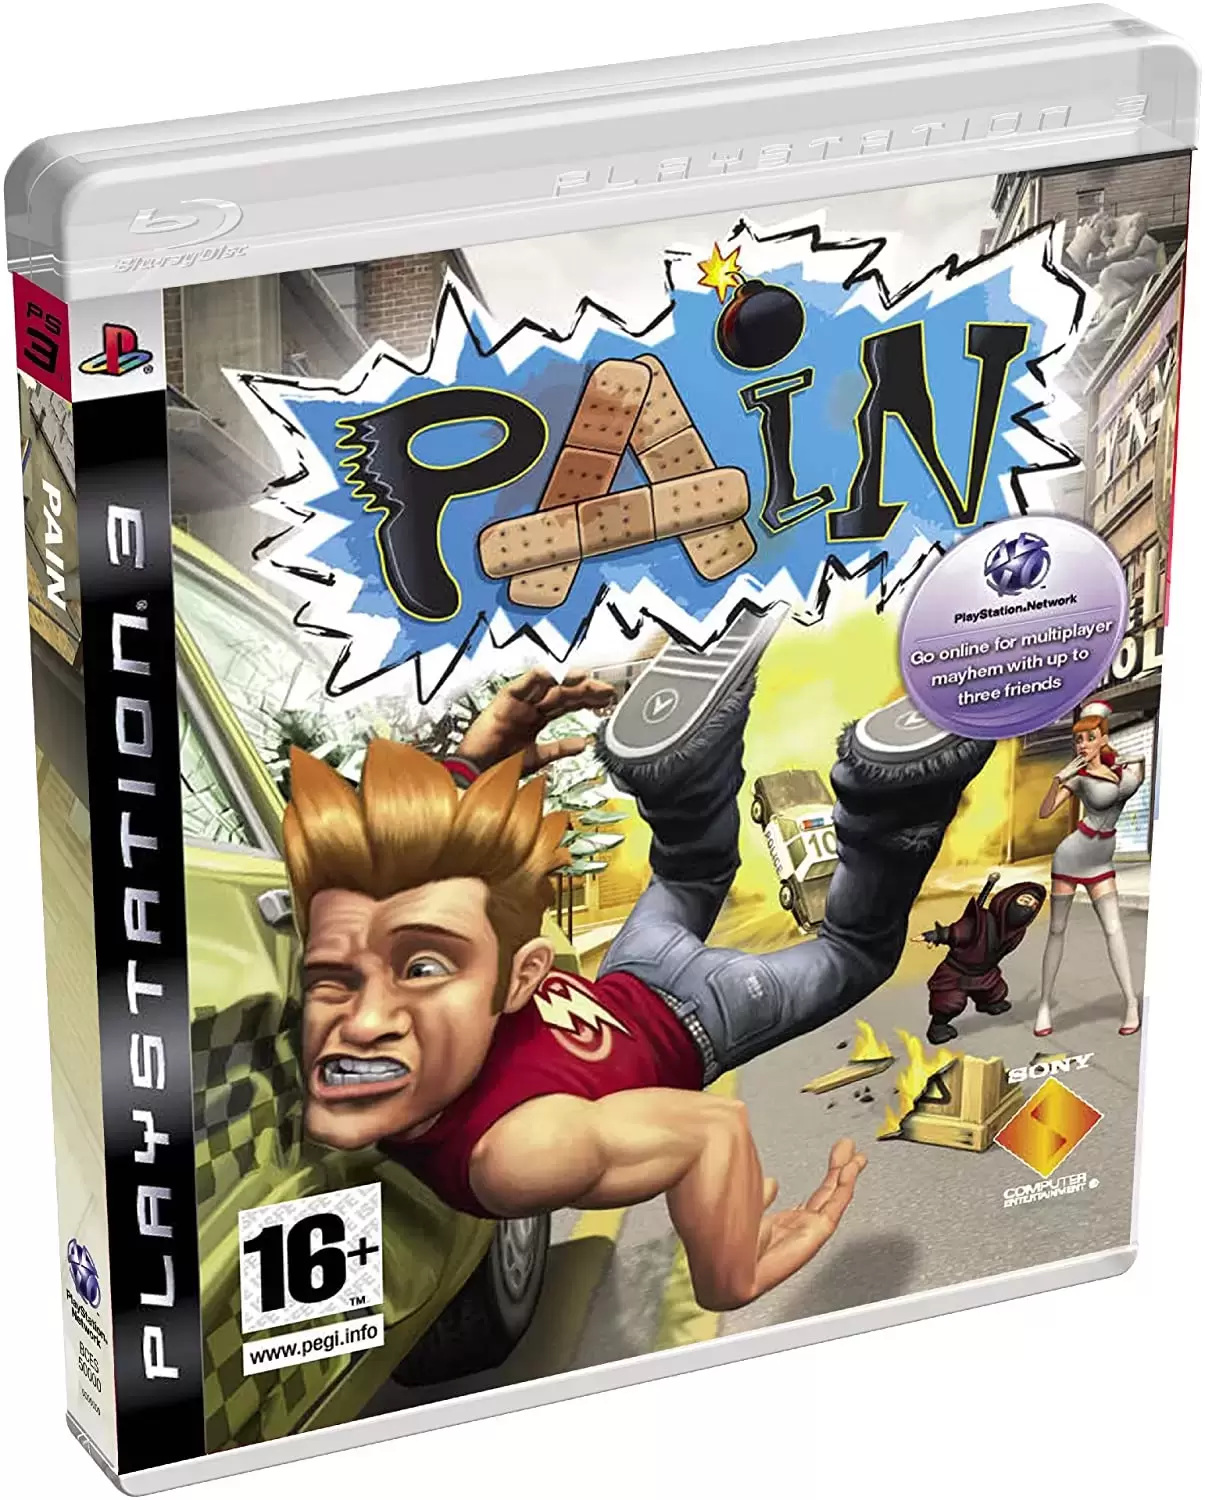 PS3 Games - Pain